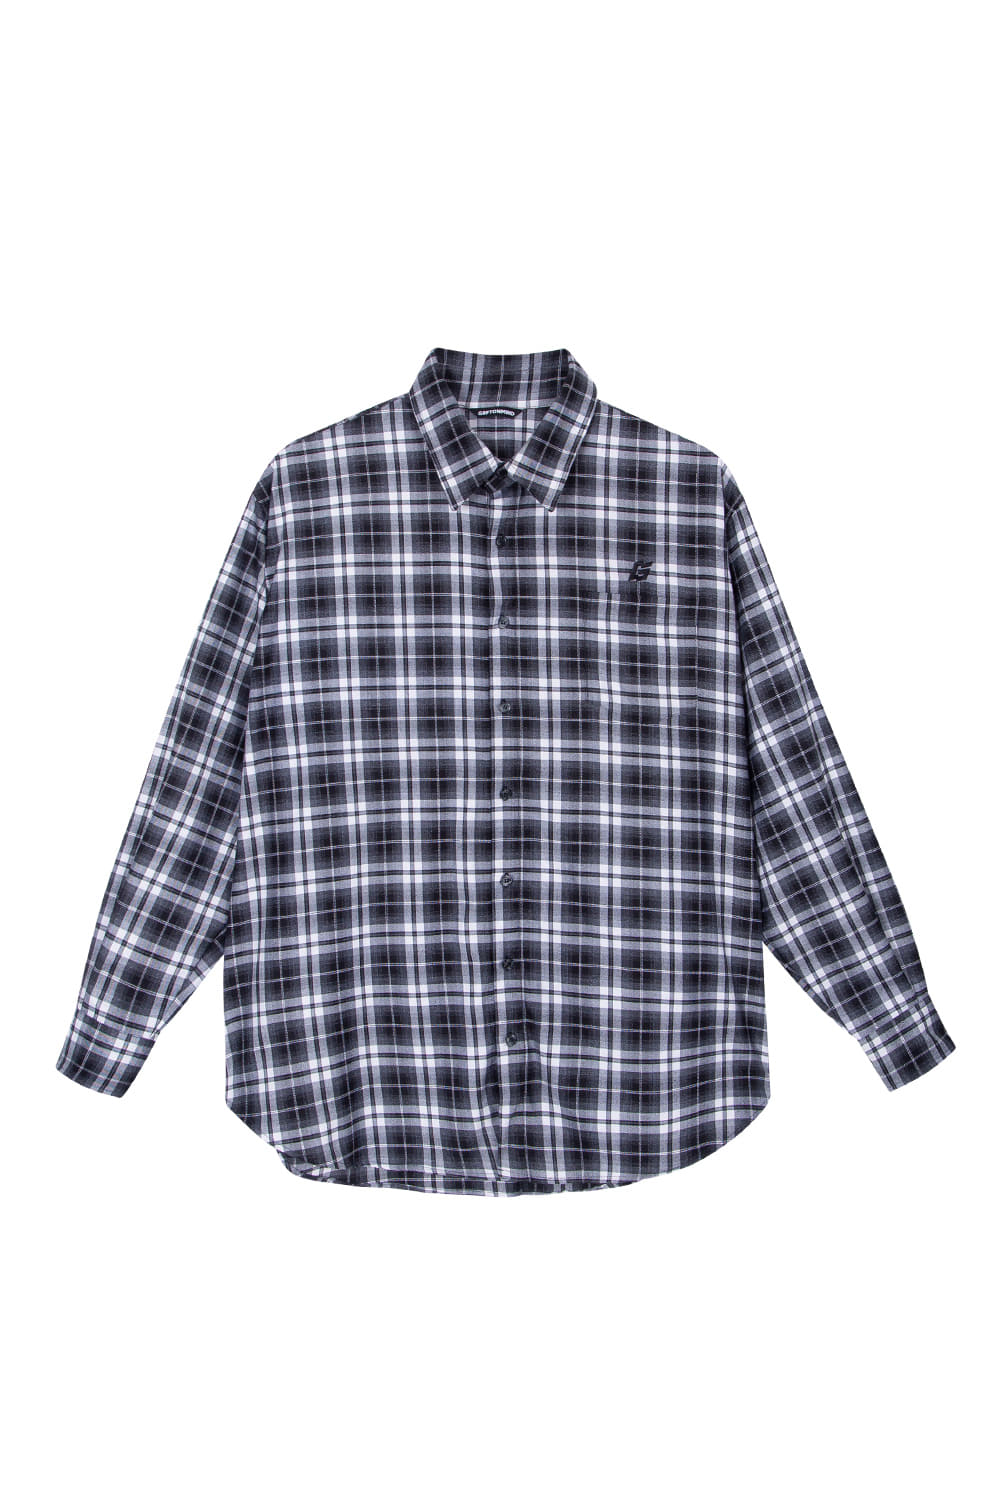 EMBROIDERED LOGO CHECKED FLANNEL SHIRTSGRAFFITIONMIND